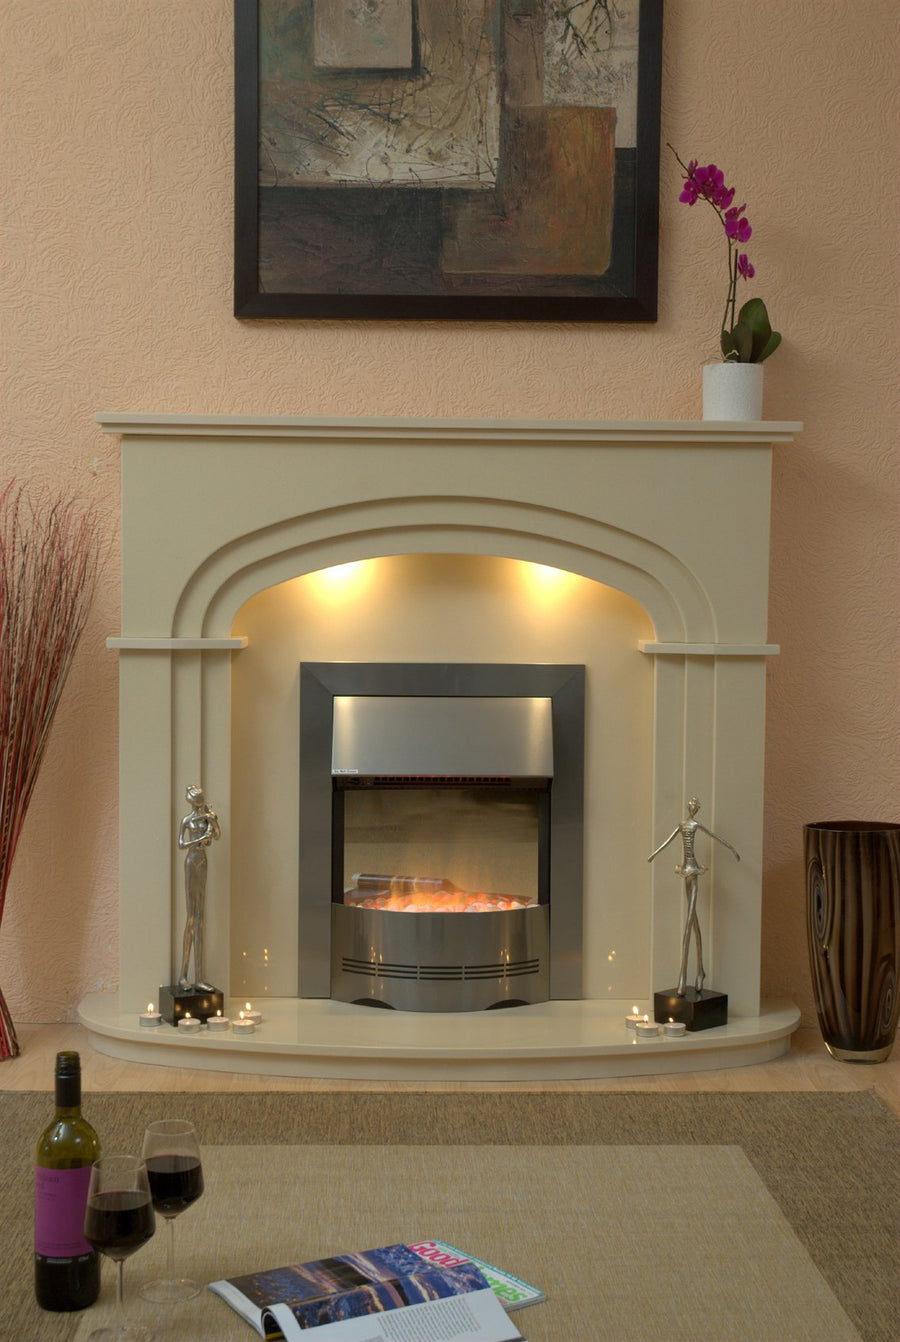 Natural Marble or Limestone Shelbourne  Fireplace Hearth & Back Panel - bespokemarblefireplaces